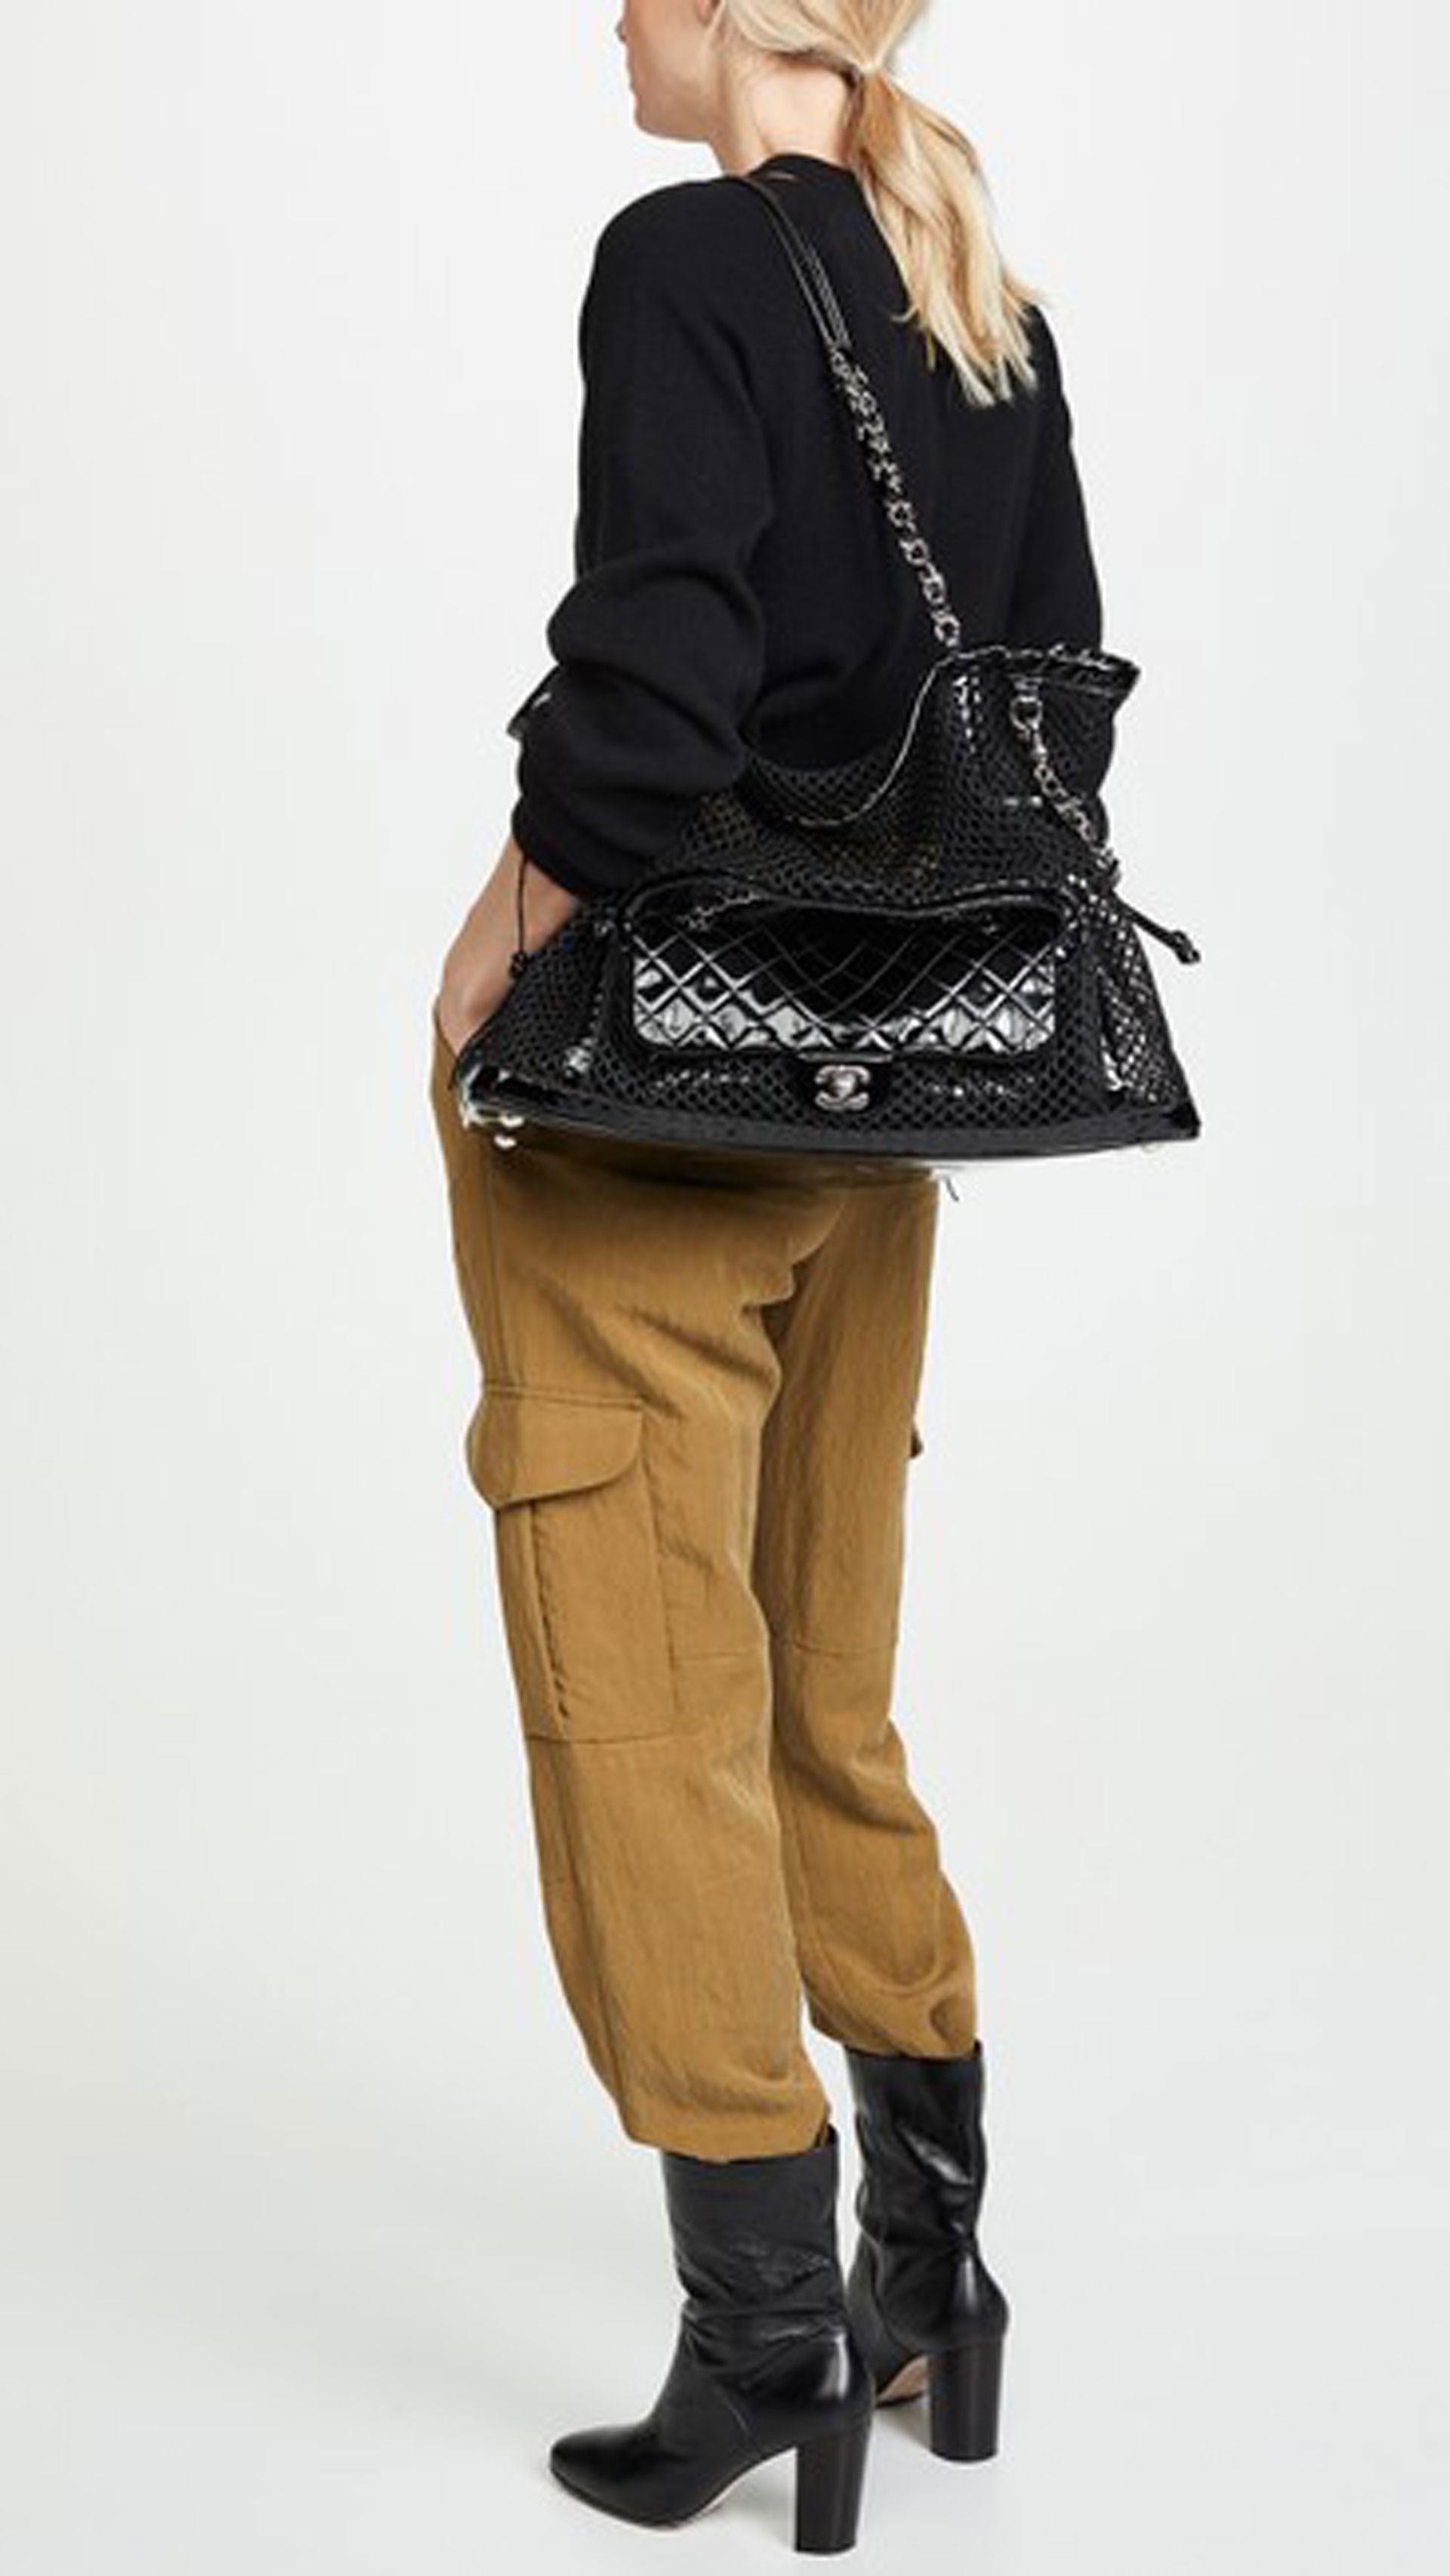  2 In 1 Chanel Shopping Classic Flap Cruise Mesh Woven Crochet Black Patent Bag In Good Condition For Sale In Miami, FL